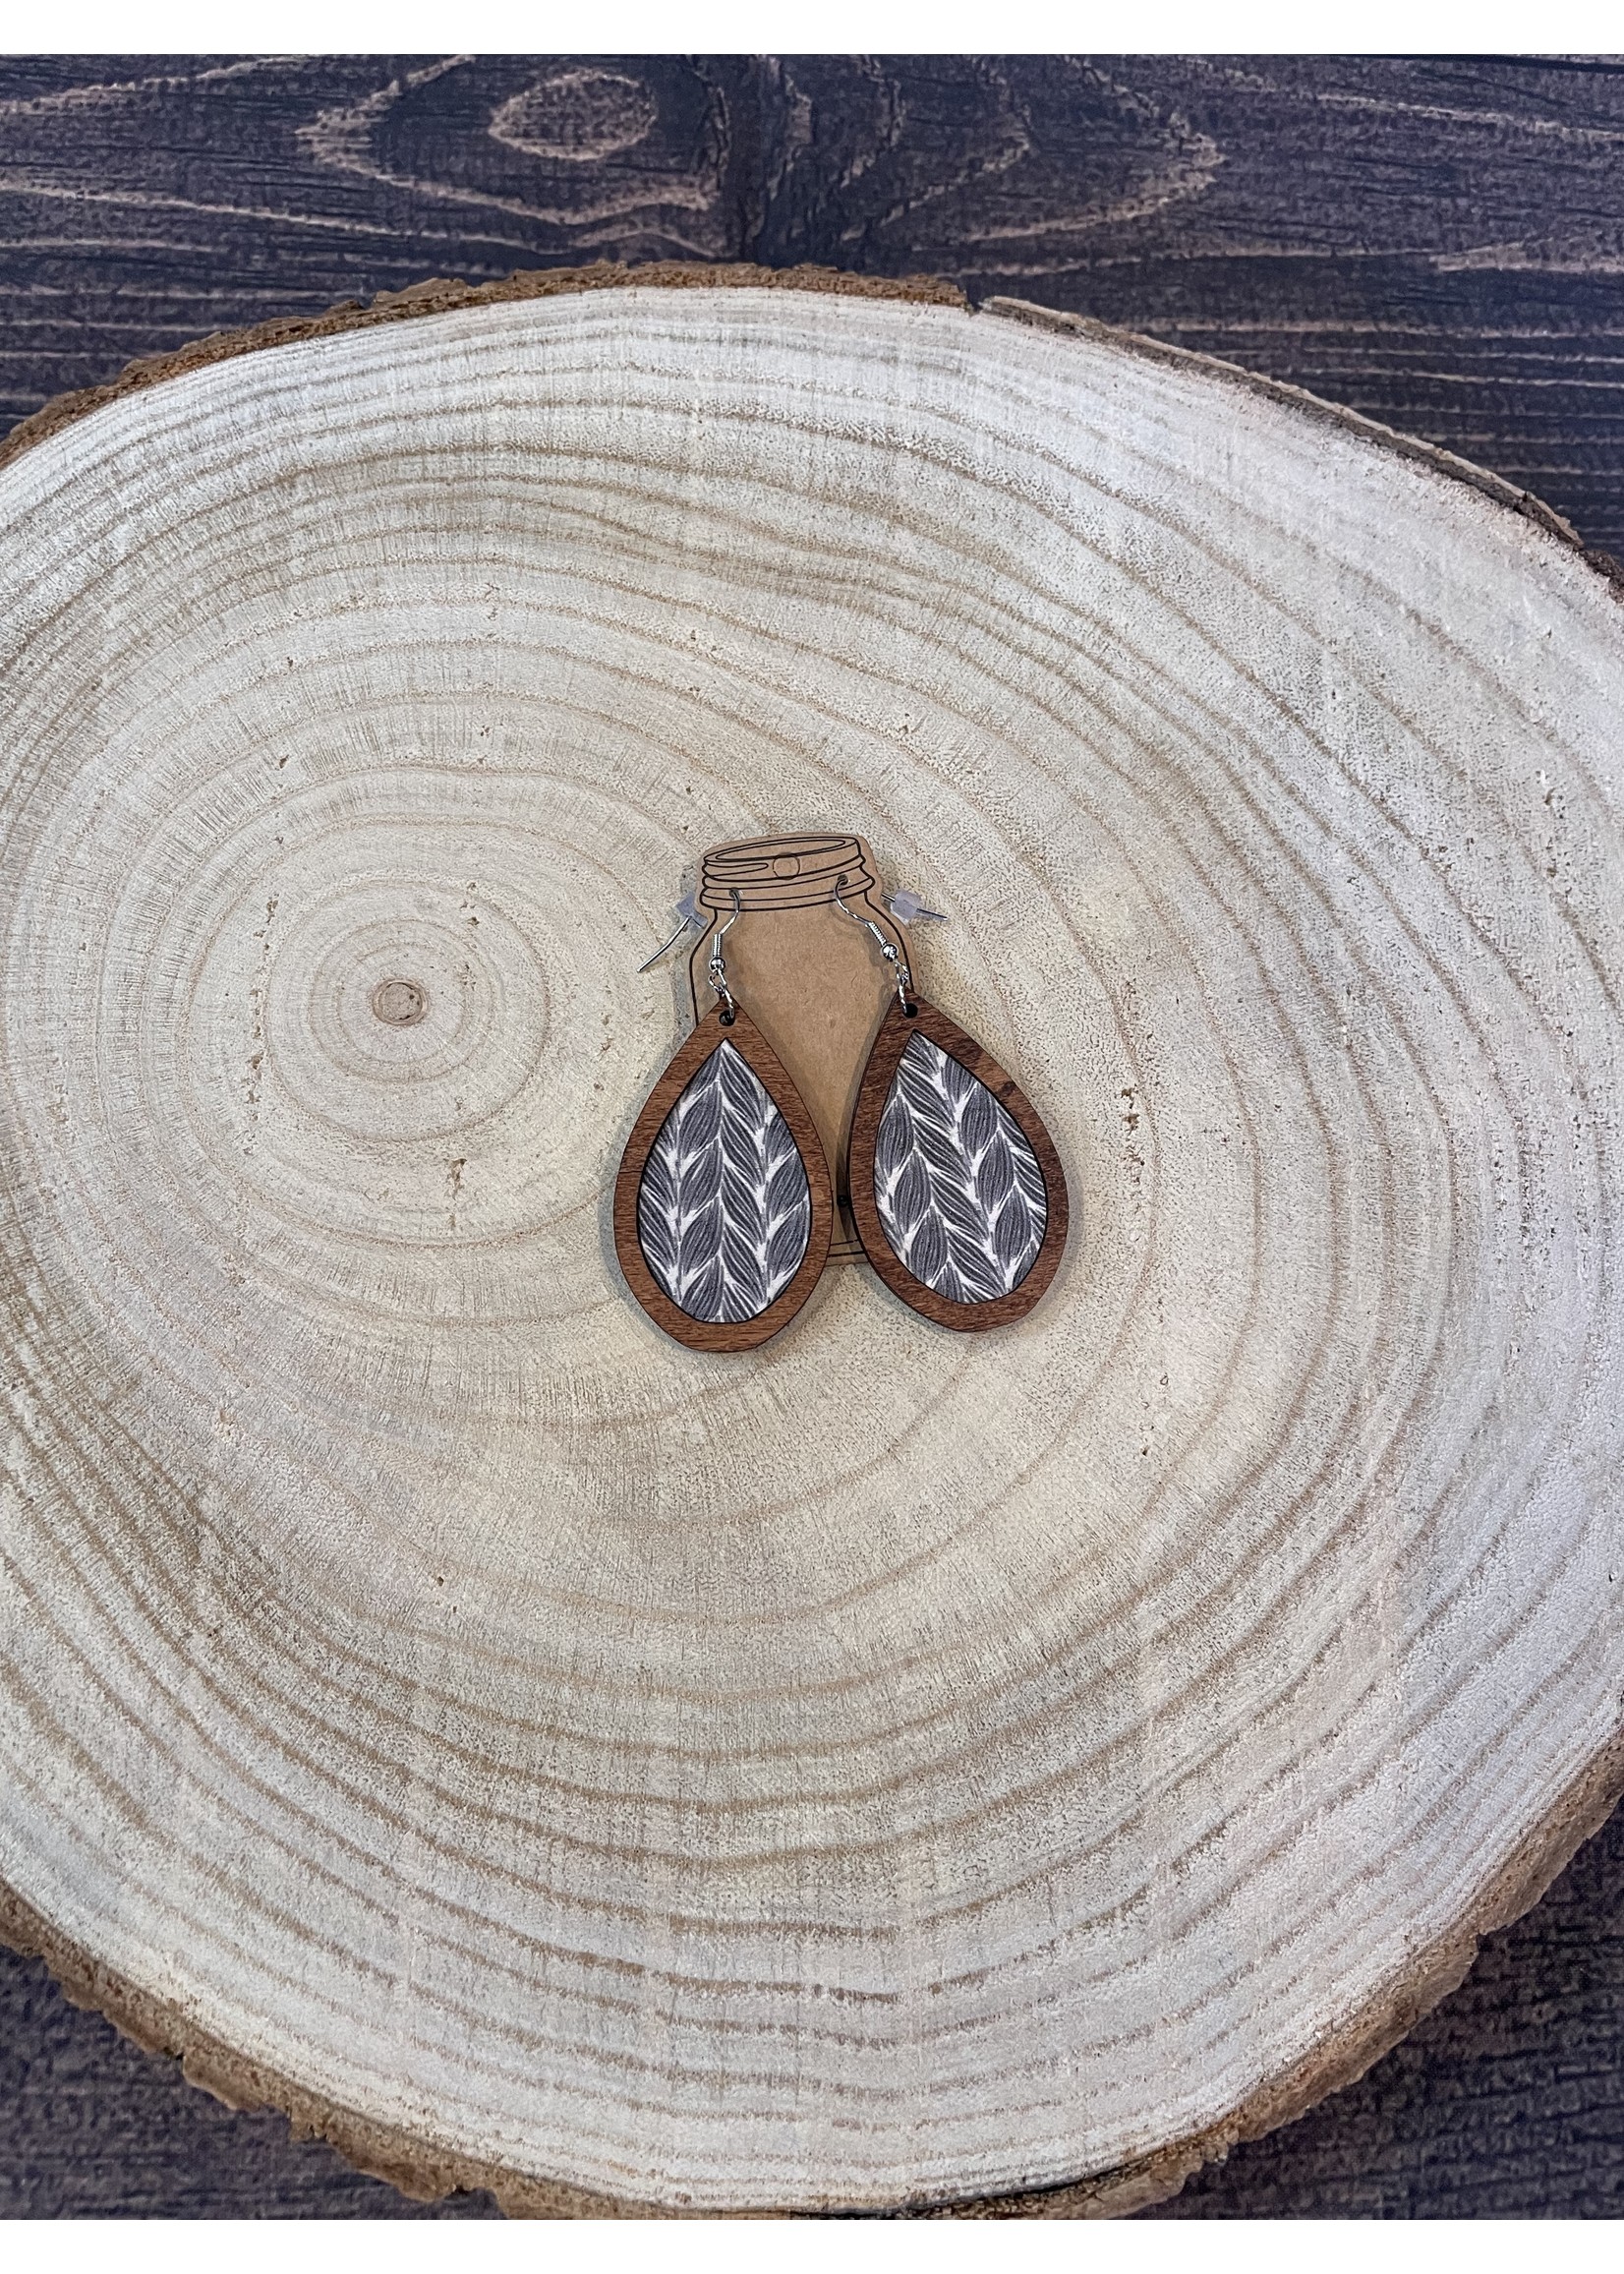 Lightweight Wood Earrings with Blue Cork Inset